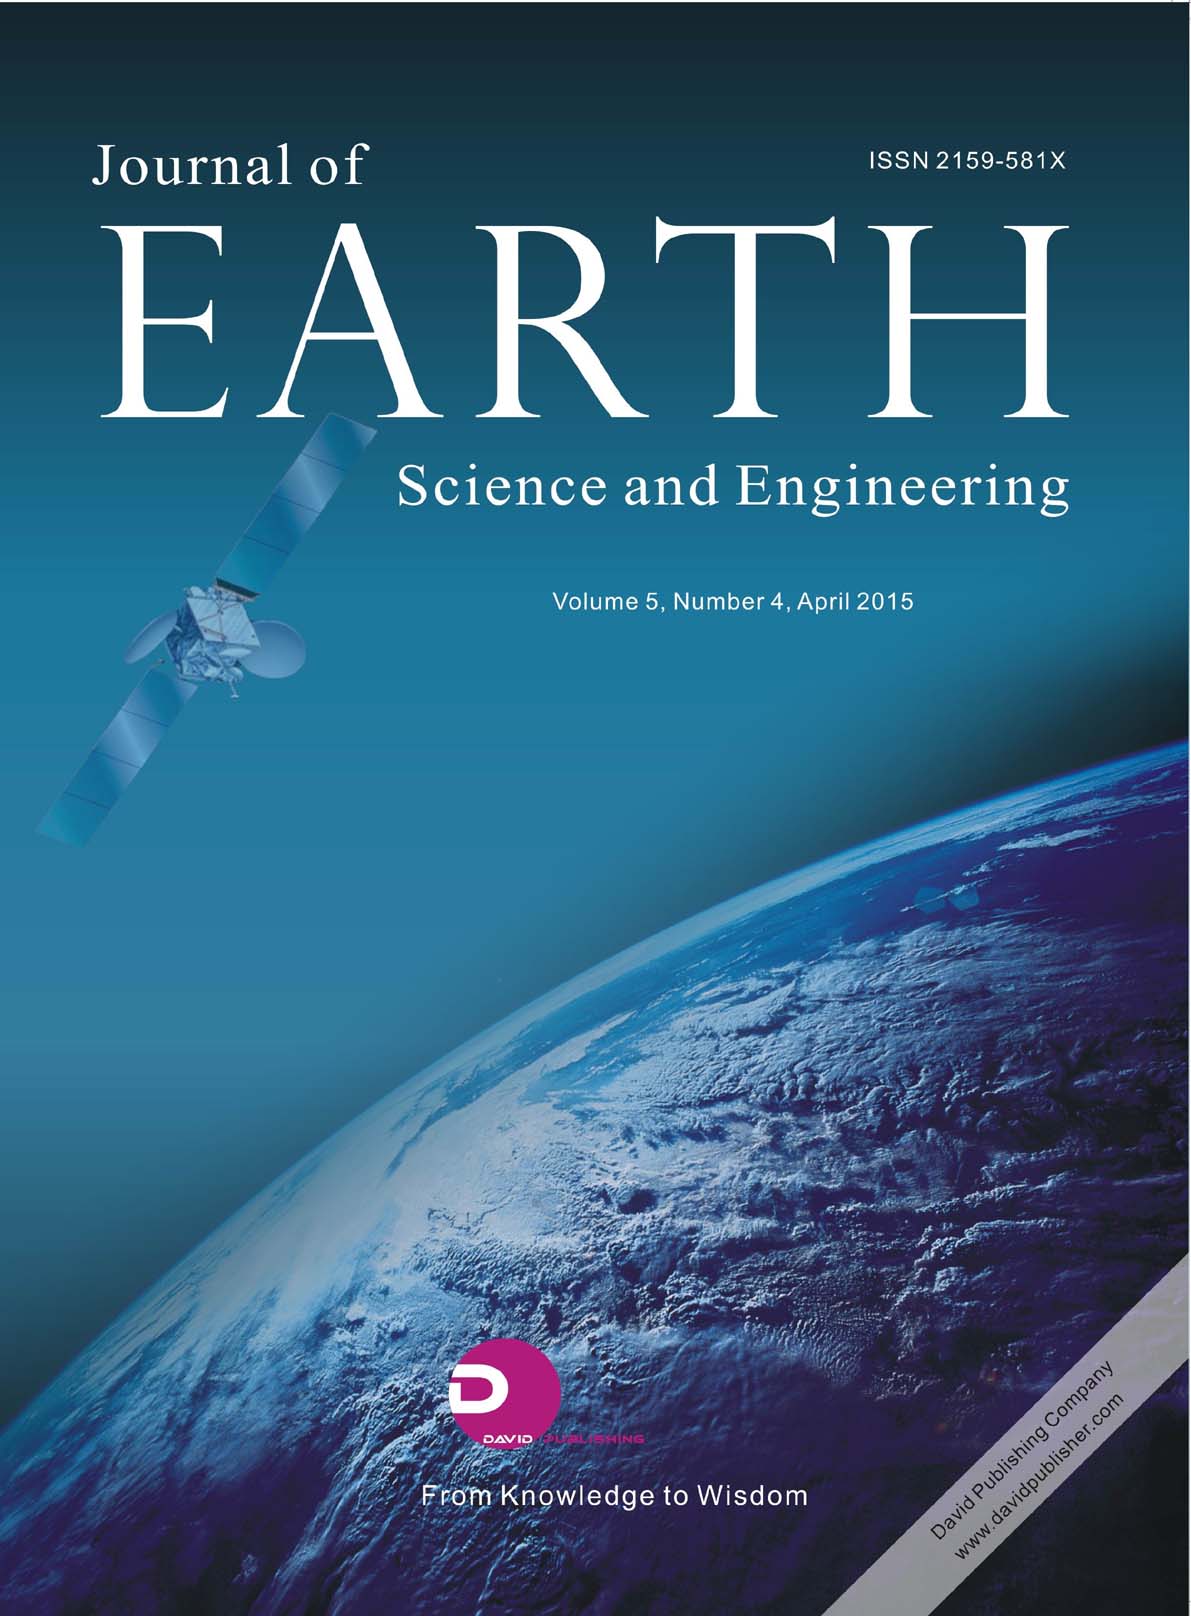 Journal of Earth Science and Engineering